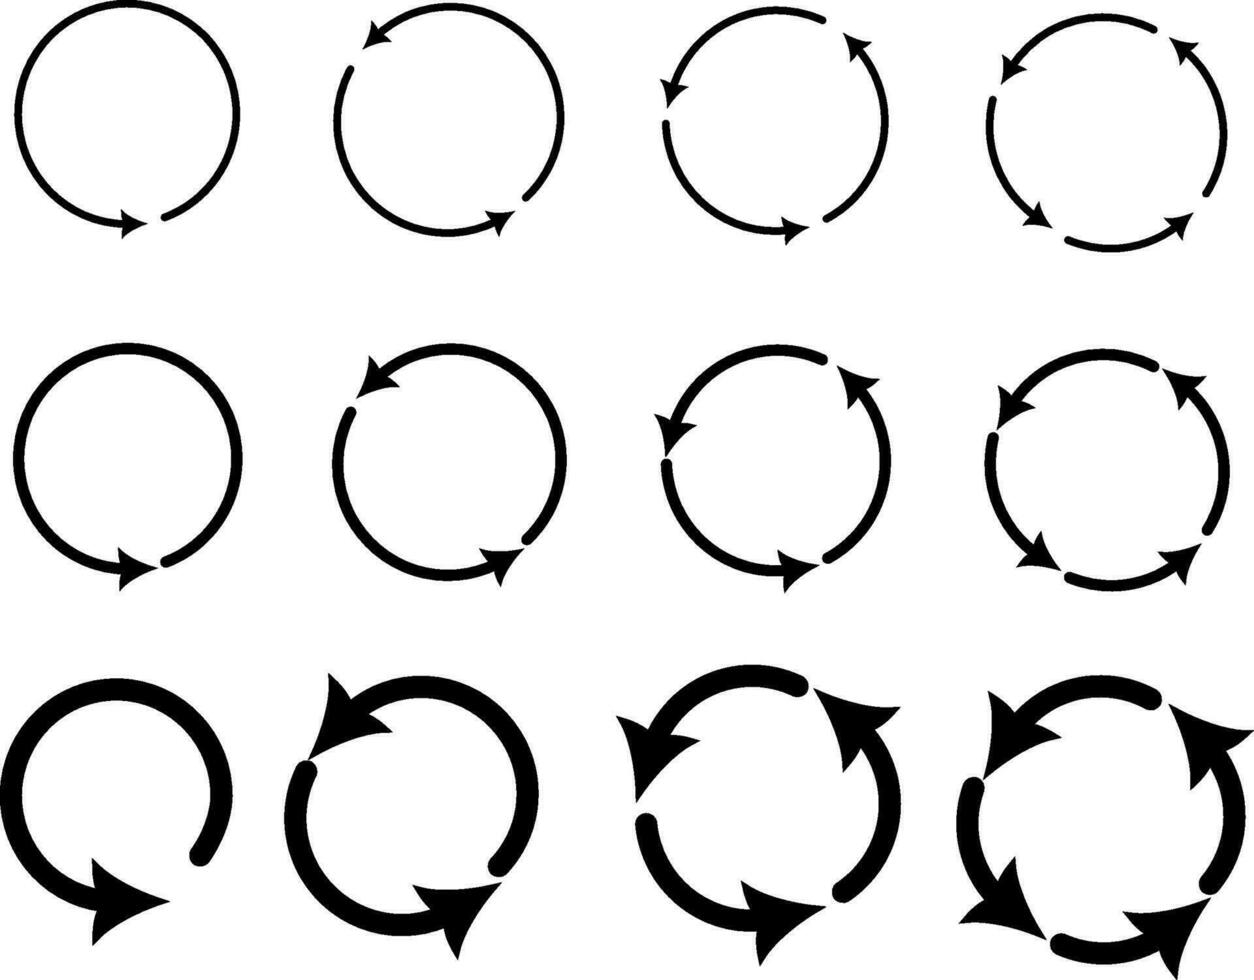 The circular arrows are different black color, different thickness. Replaceable vector design.